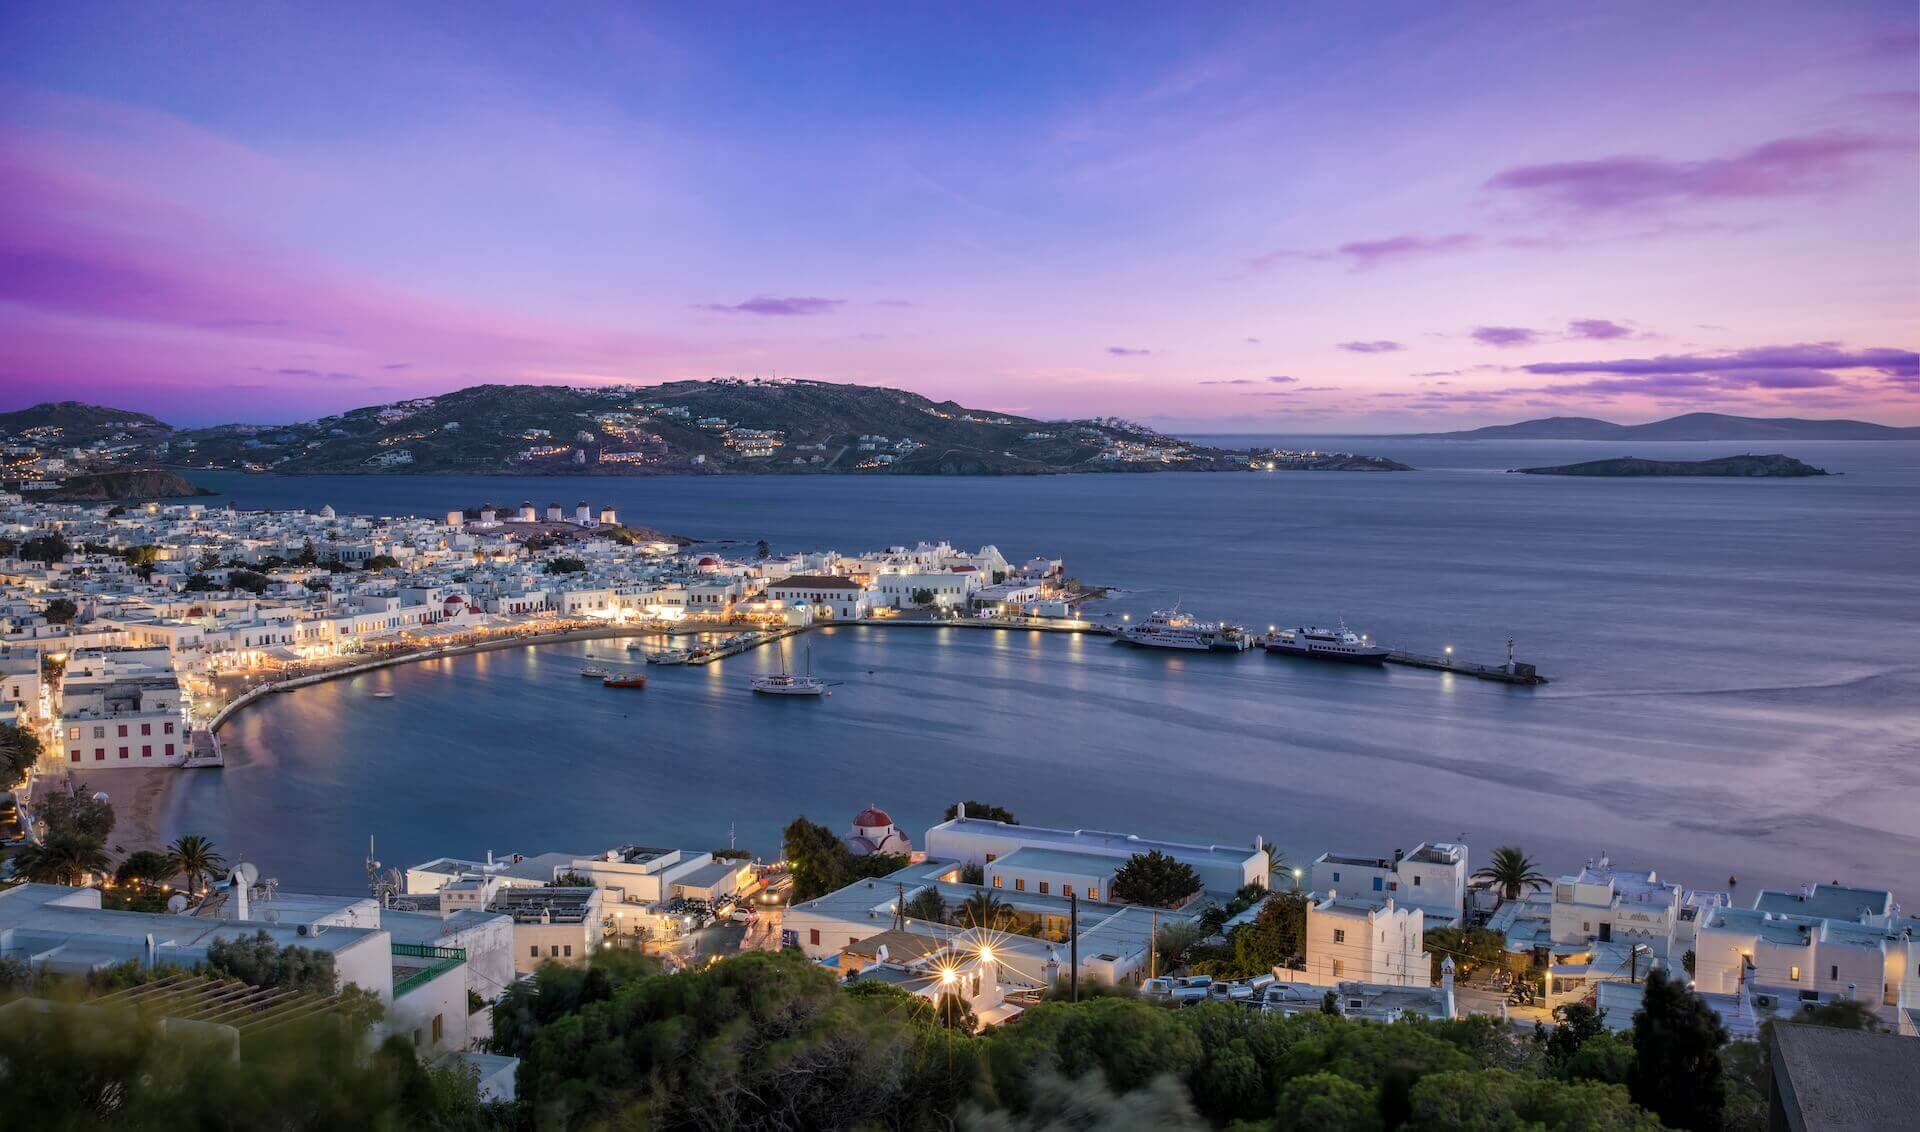 View of the old port in Mykonos town at sunset